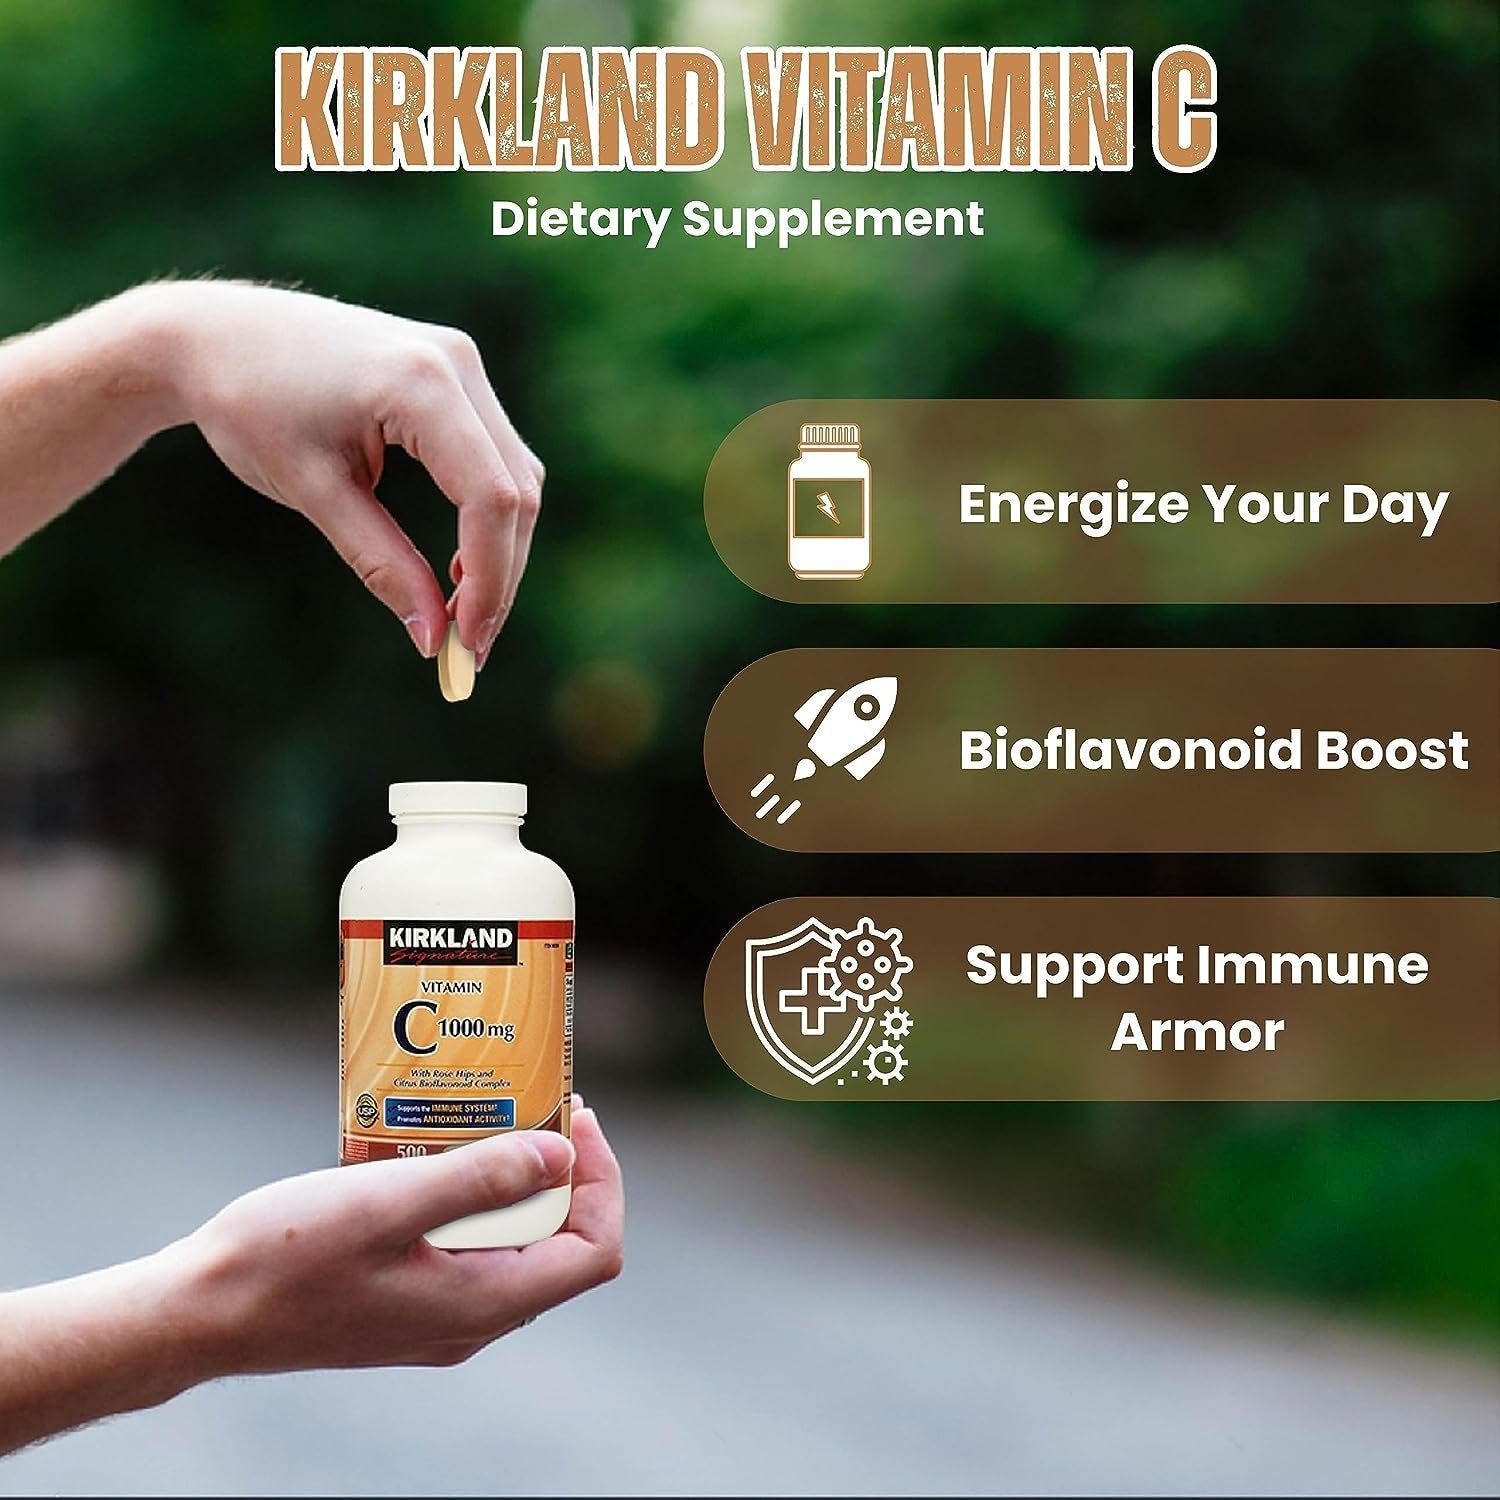 Worldwide Nutrition Kirkland Vitamin C with Rose Hips and Citrus Bioflavonoids Complex (Vitamin C 1000mg) - 500 Vitamin C Supplement Tablets